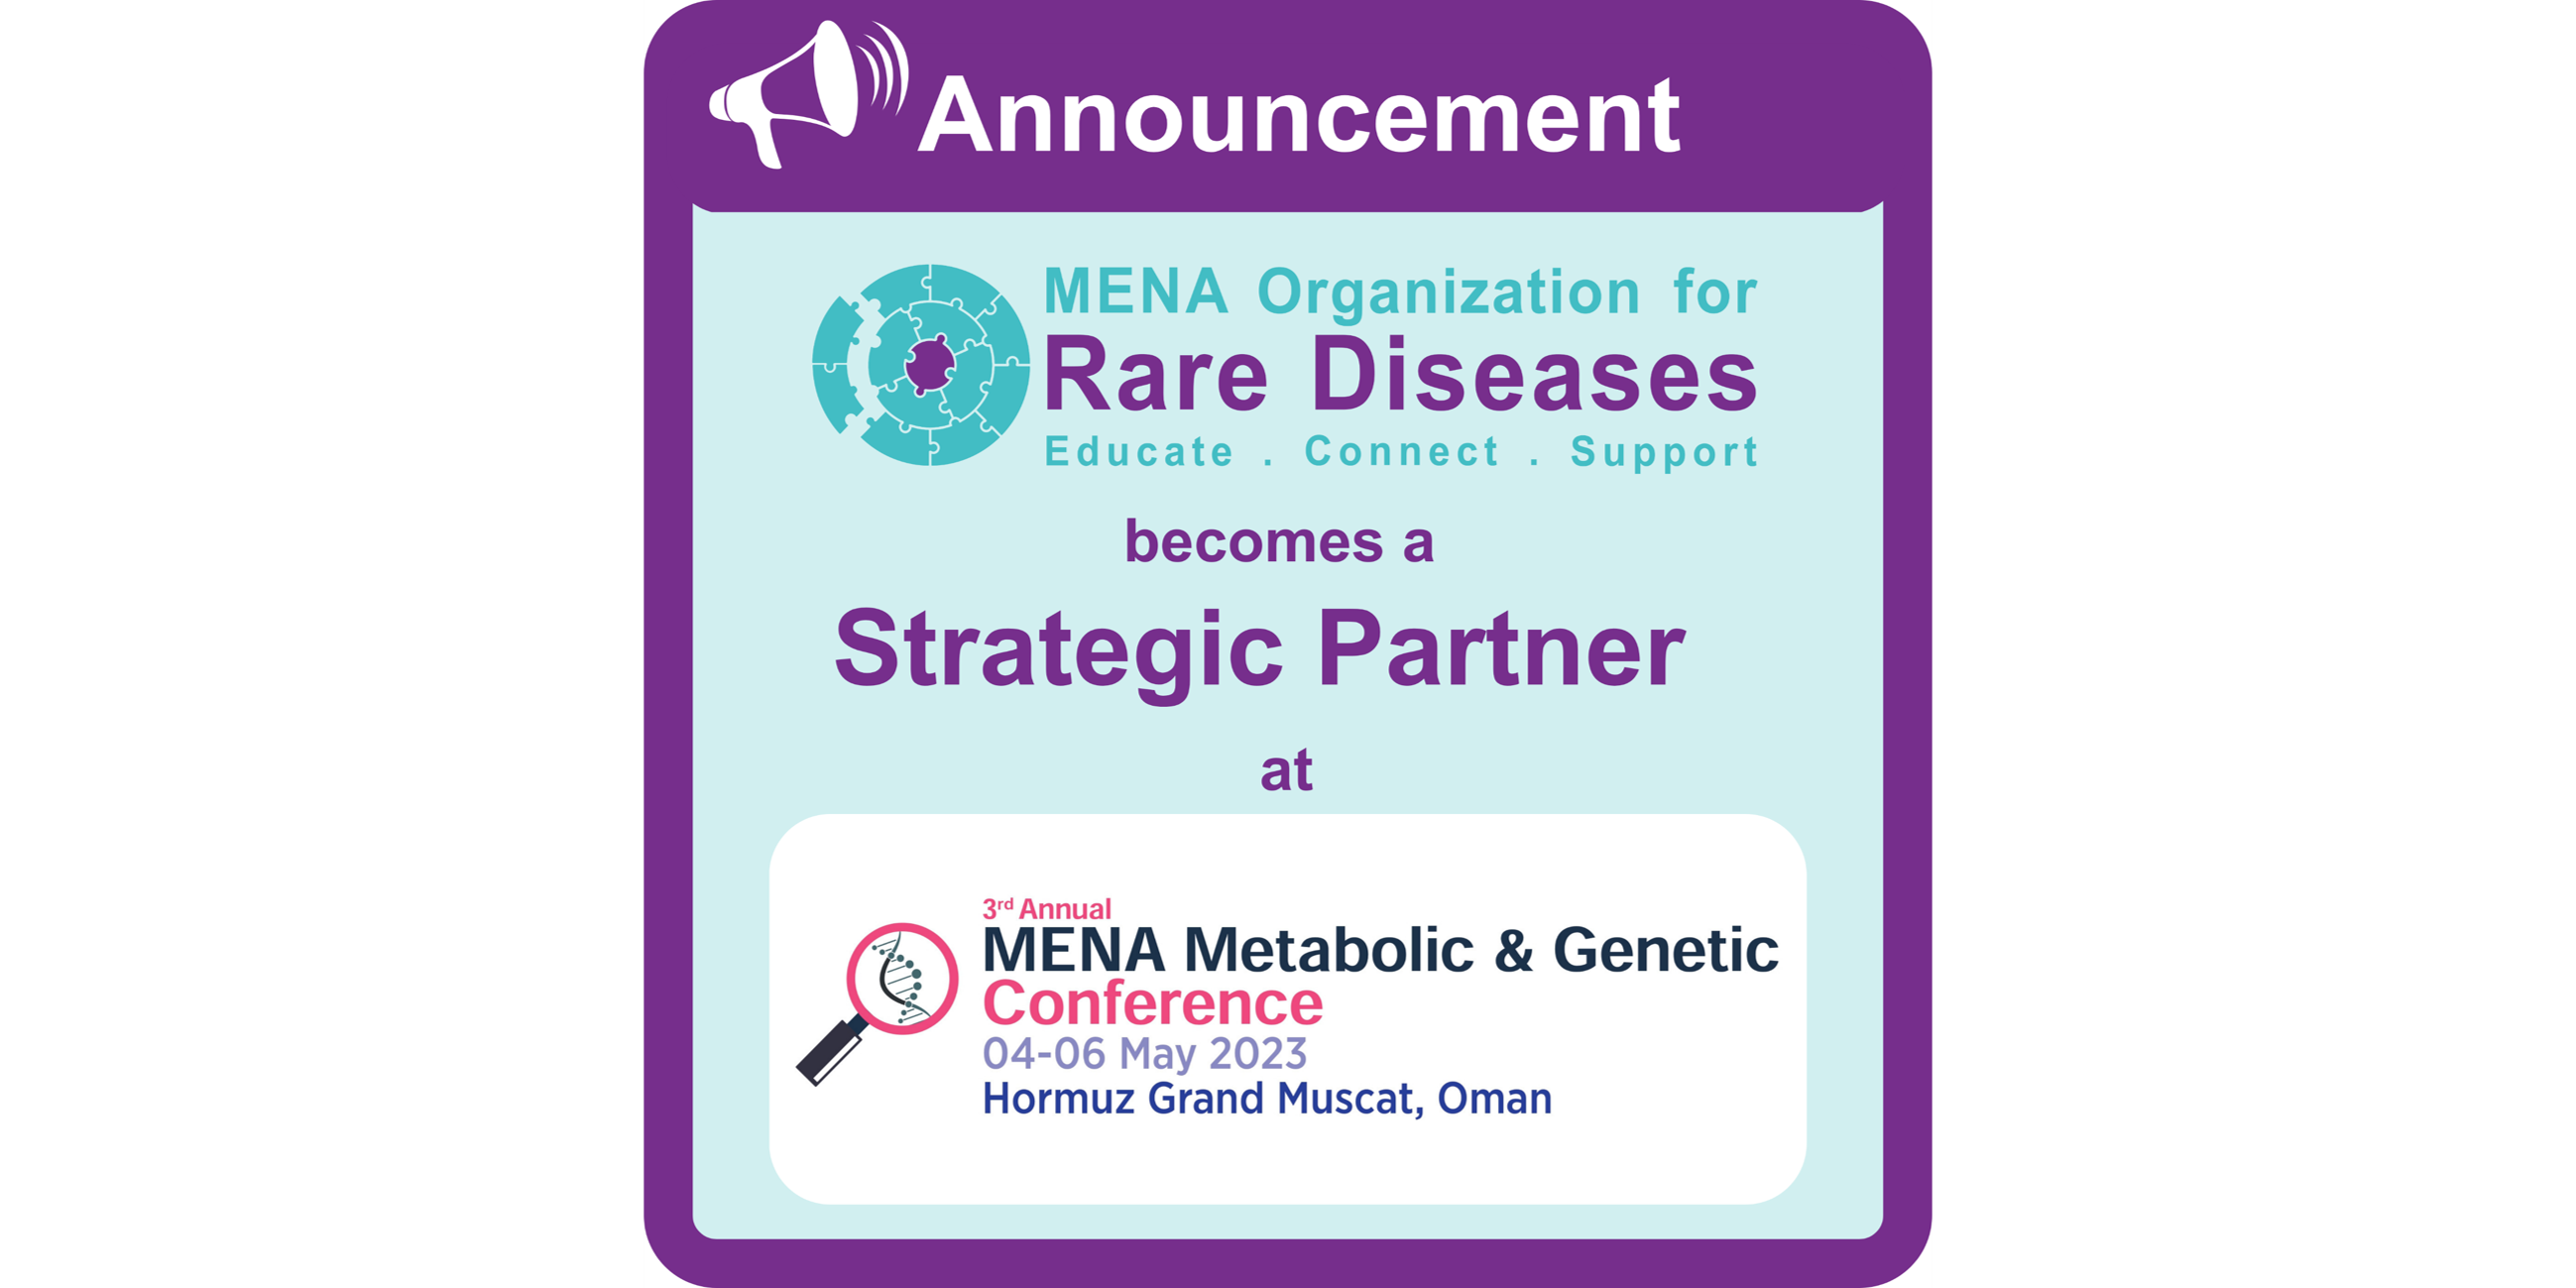 The 3rd MENA Metabolic & Genetic Conference is supported by the MENA Organization for Rare Diseases